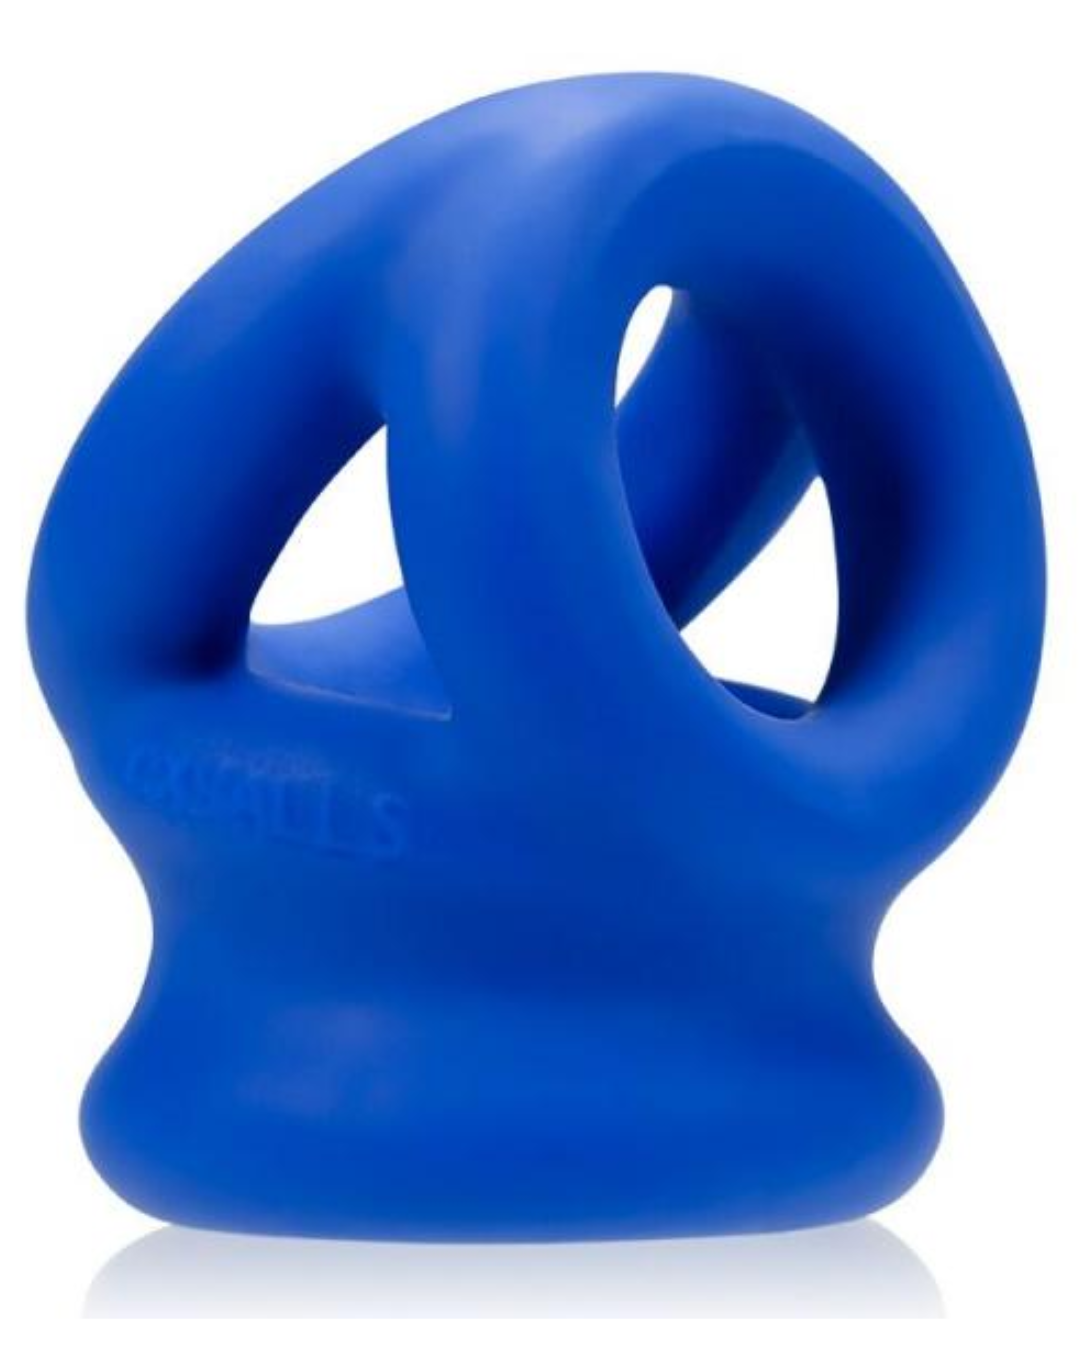 Oxballs Tri Squeeze Cocksling Ball Stretcher - Blue